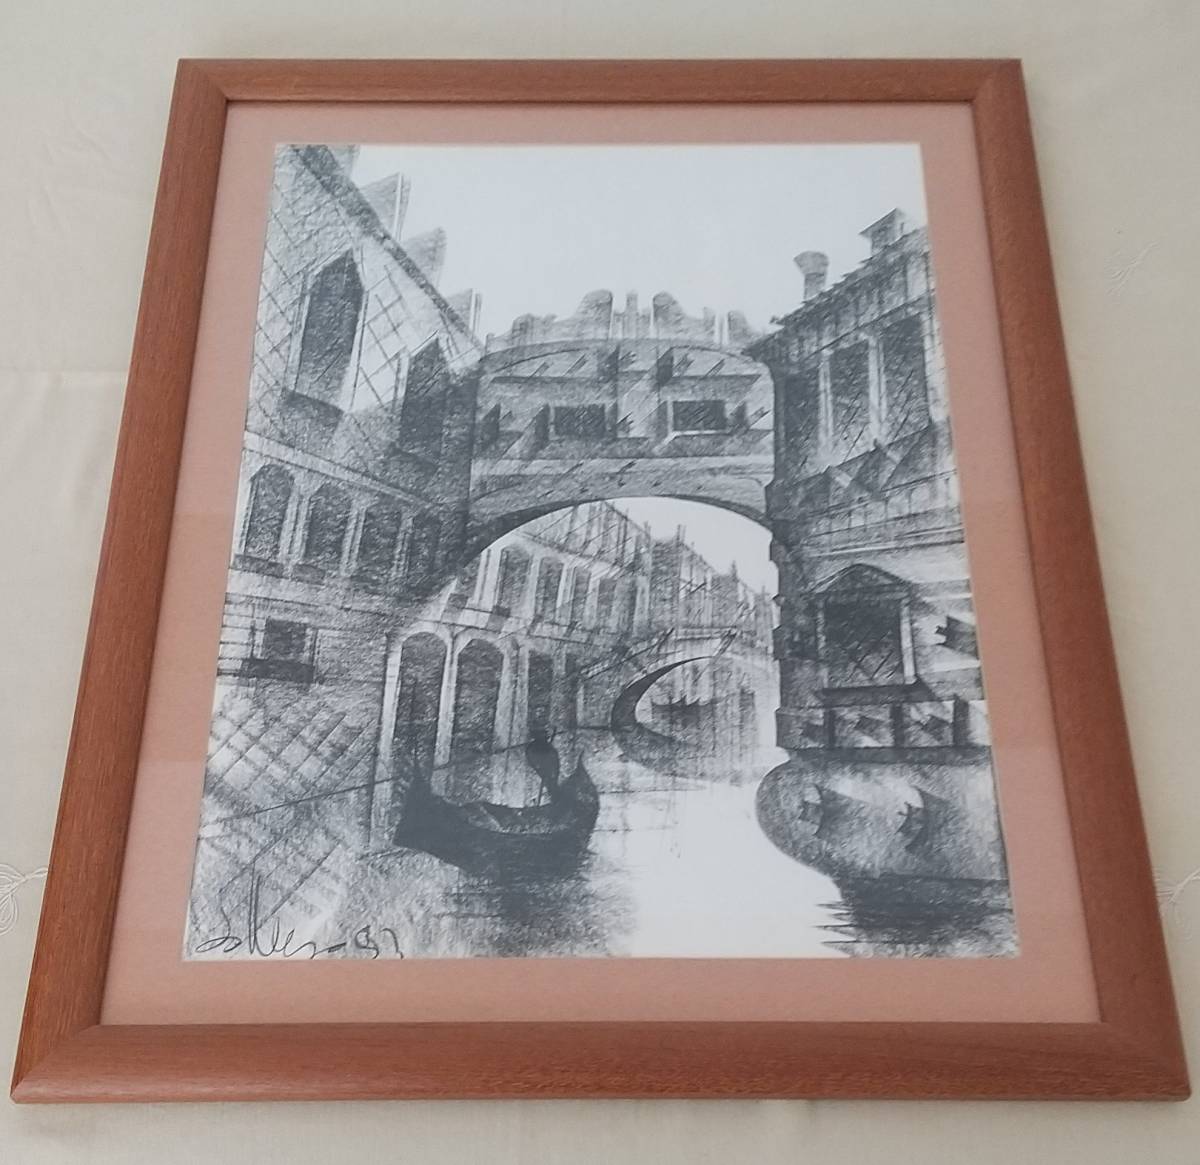 *1990 year about Italy fi Len tseponte*bekio.. buy * charcoal drawing * frame *